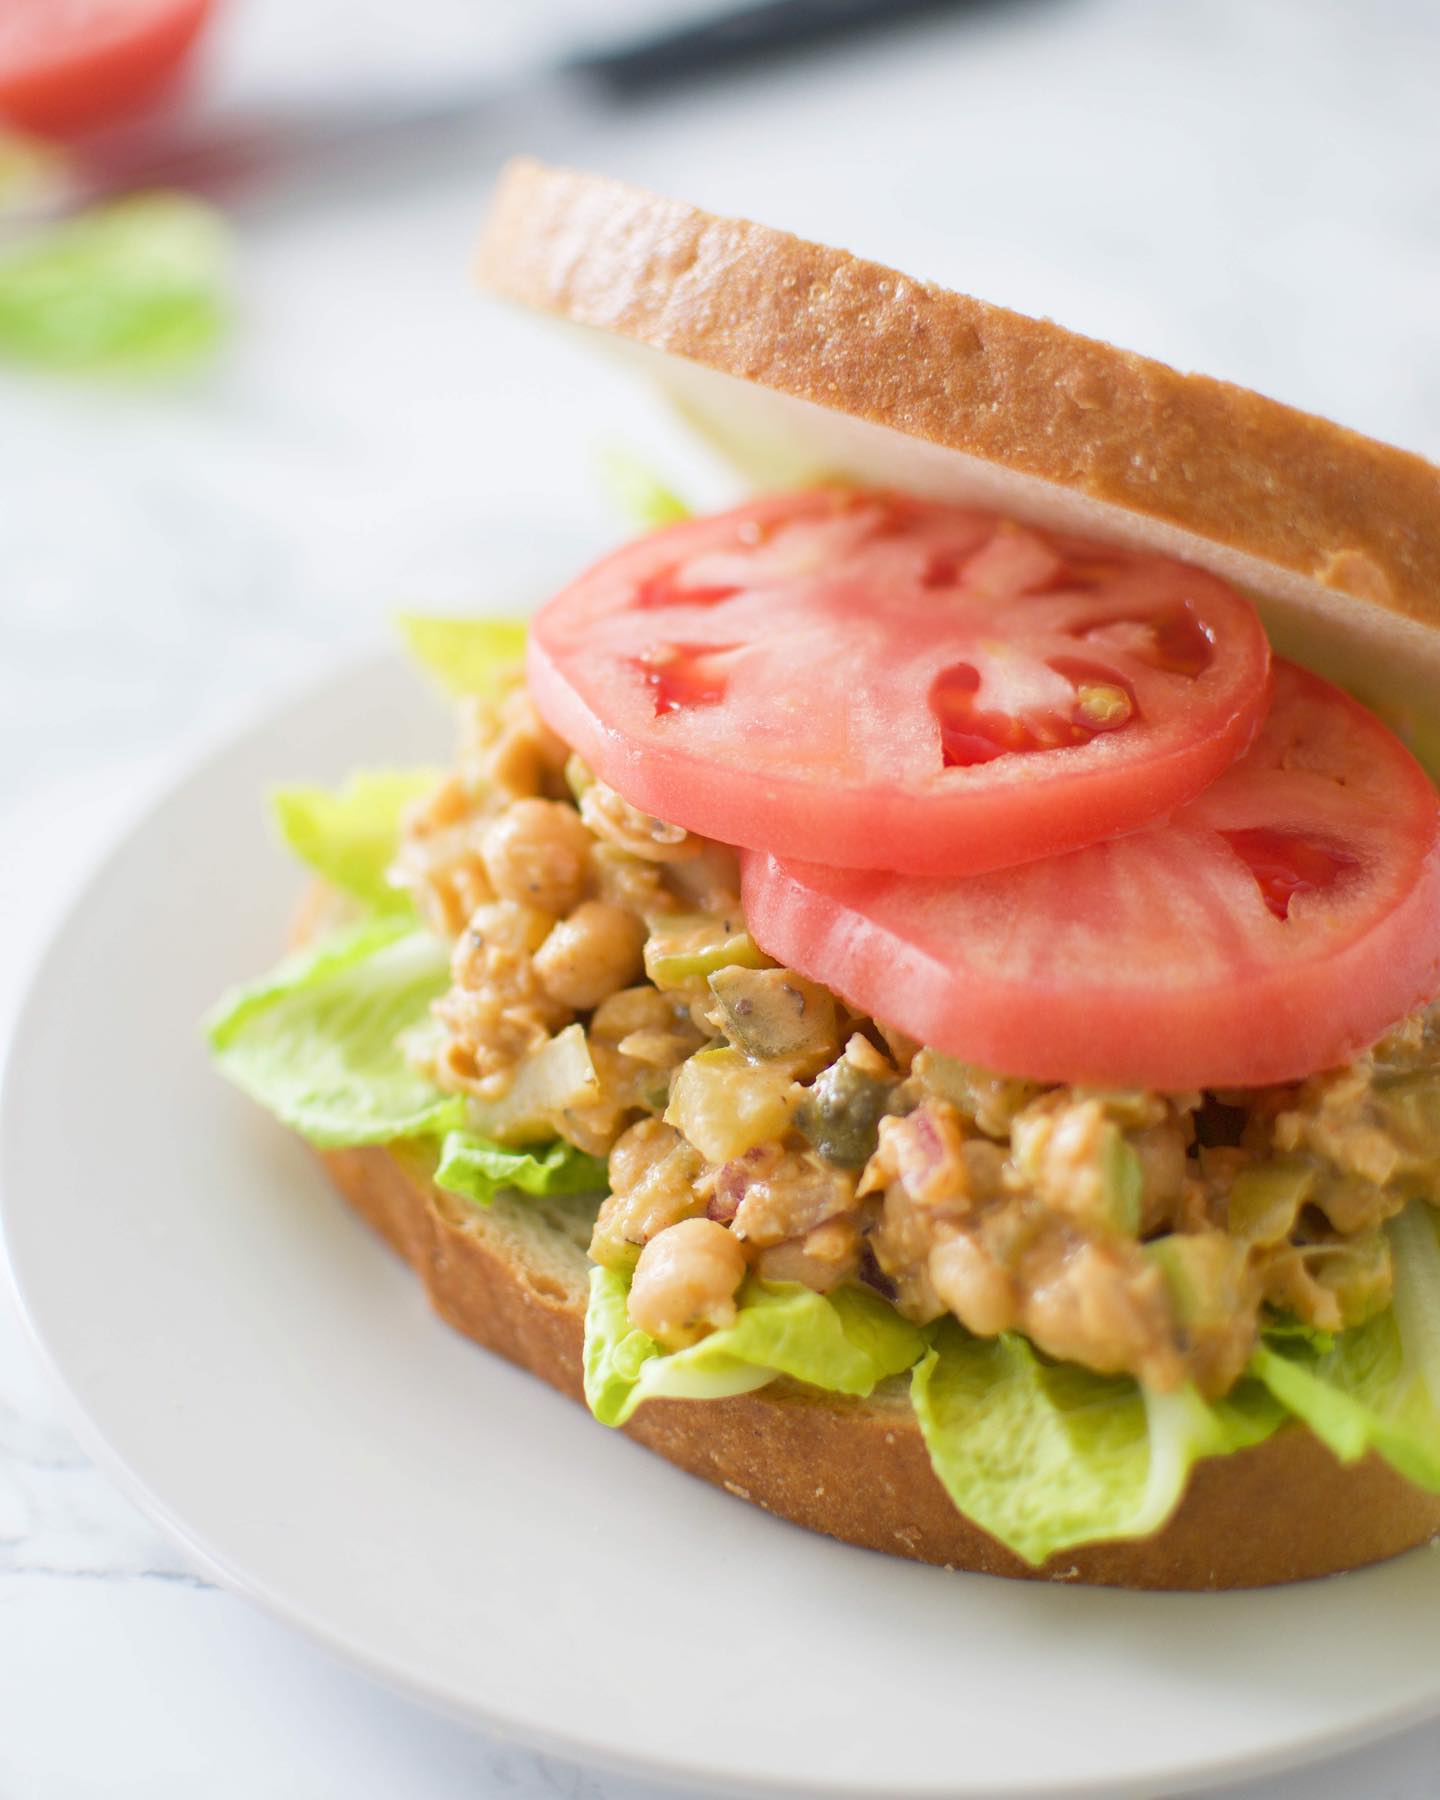 If you’re looking for an easy, light sandwich to make this summer, look no further!

This Vegan Chickpea Tuna is in coooonstant rotation at my house (year-round), but especially when the temperatures start warming up because it’s so light and refreshing.👌🏾

You can eat it between two pieces of bread, scoop it up with crackers, or even  use it to fill a lettuce wrap.

Not to mention, my kid LOVES THIS STUFF! He can’t get it in his mouth fast enough🤣

Give this a try and be sure to share it with your littles and tell me what you think!

➡️ Tap “view shop” to get the ingredients delivered to your house (first order is FREE!)

Get the deets on the blog. Link in bio!

www.icanyoucanvegan.com/chickpea-tuna-less-sandwich/